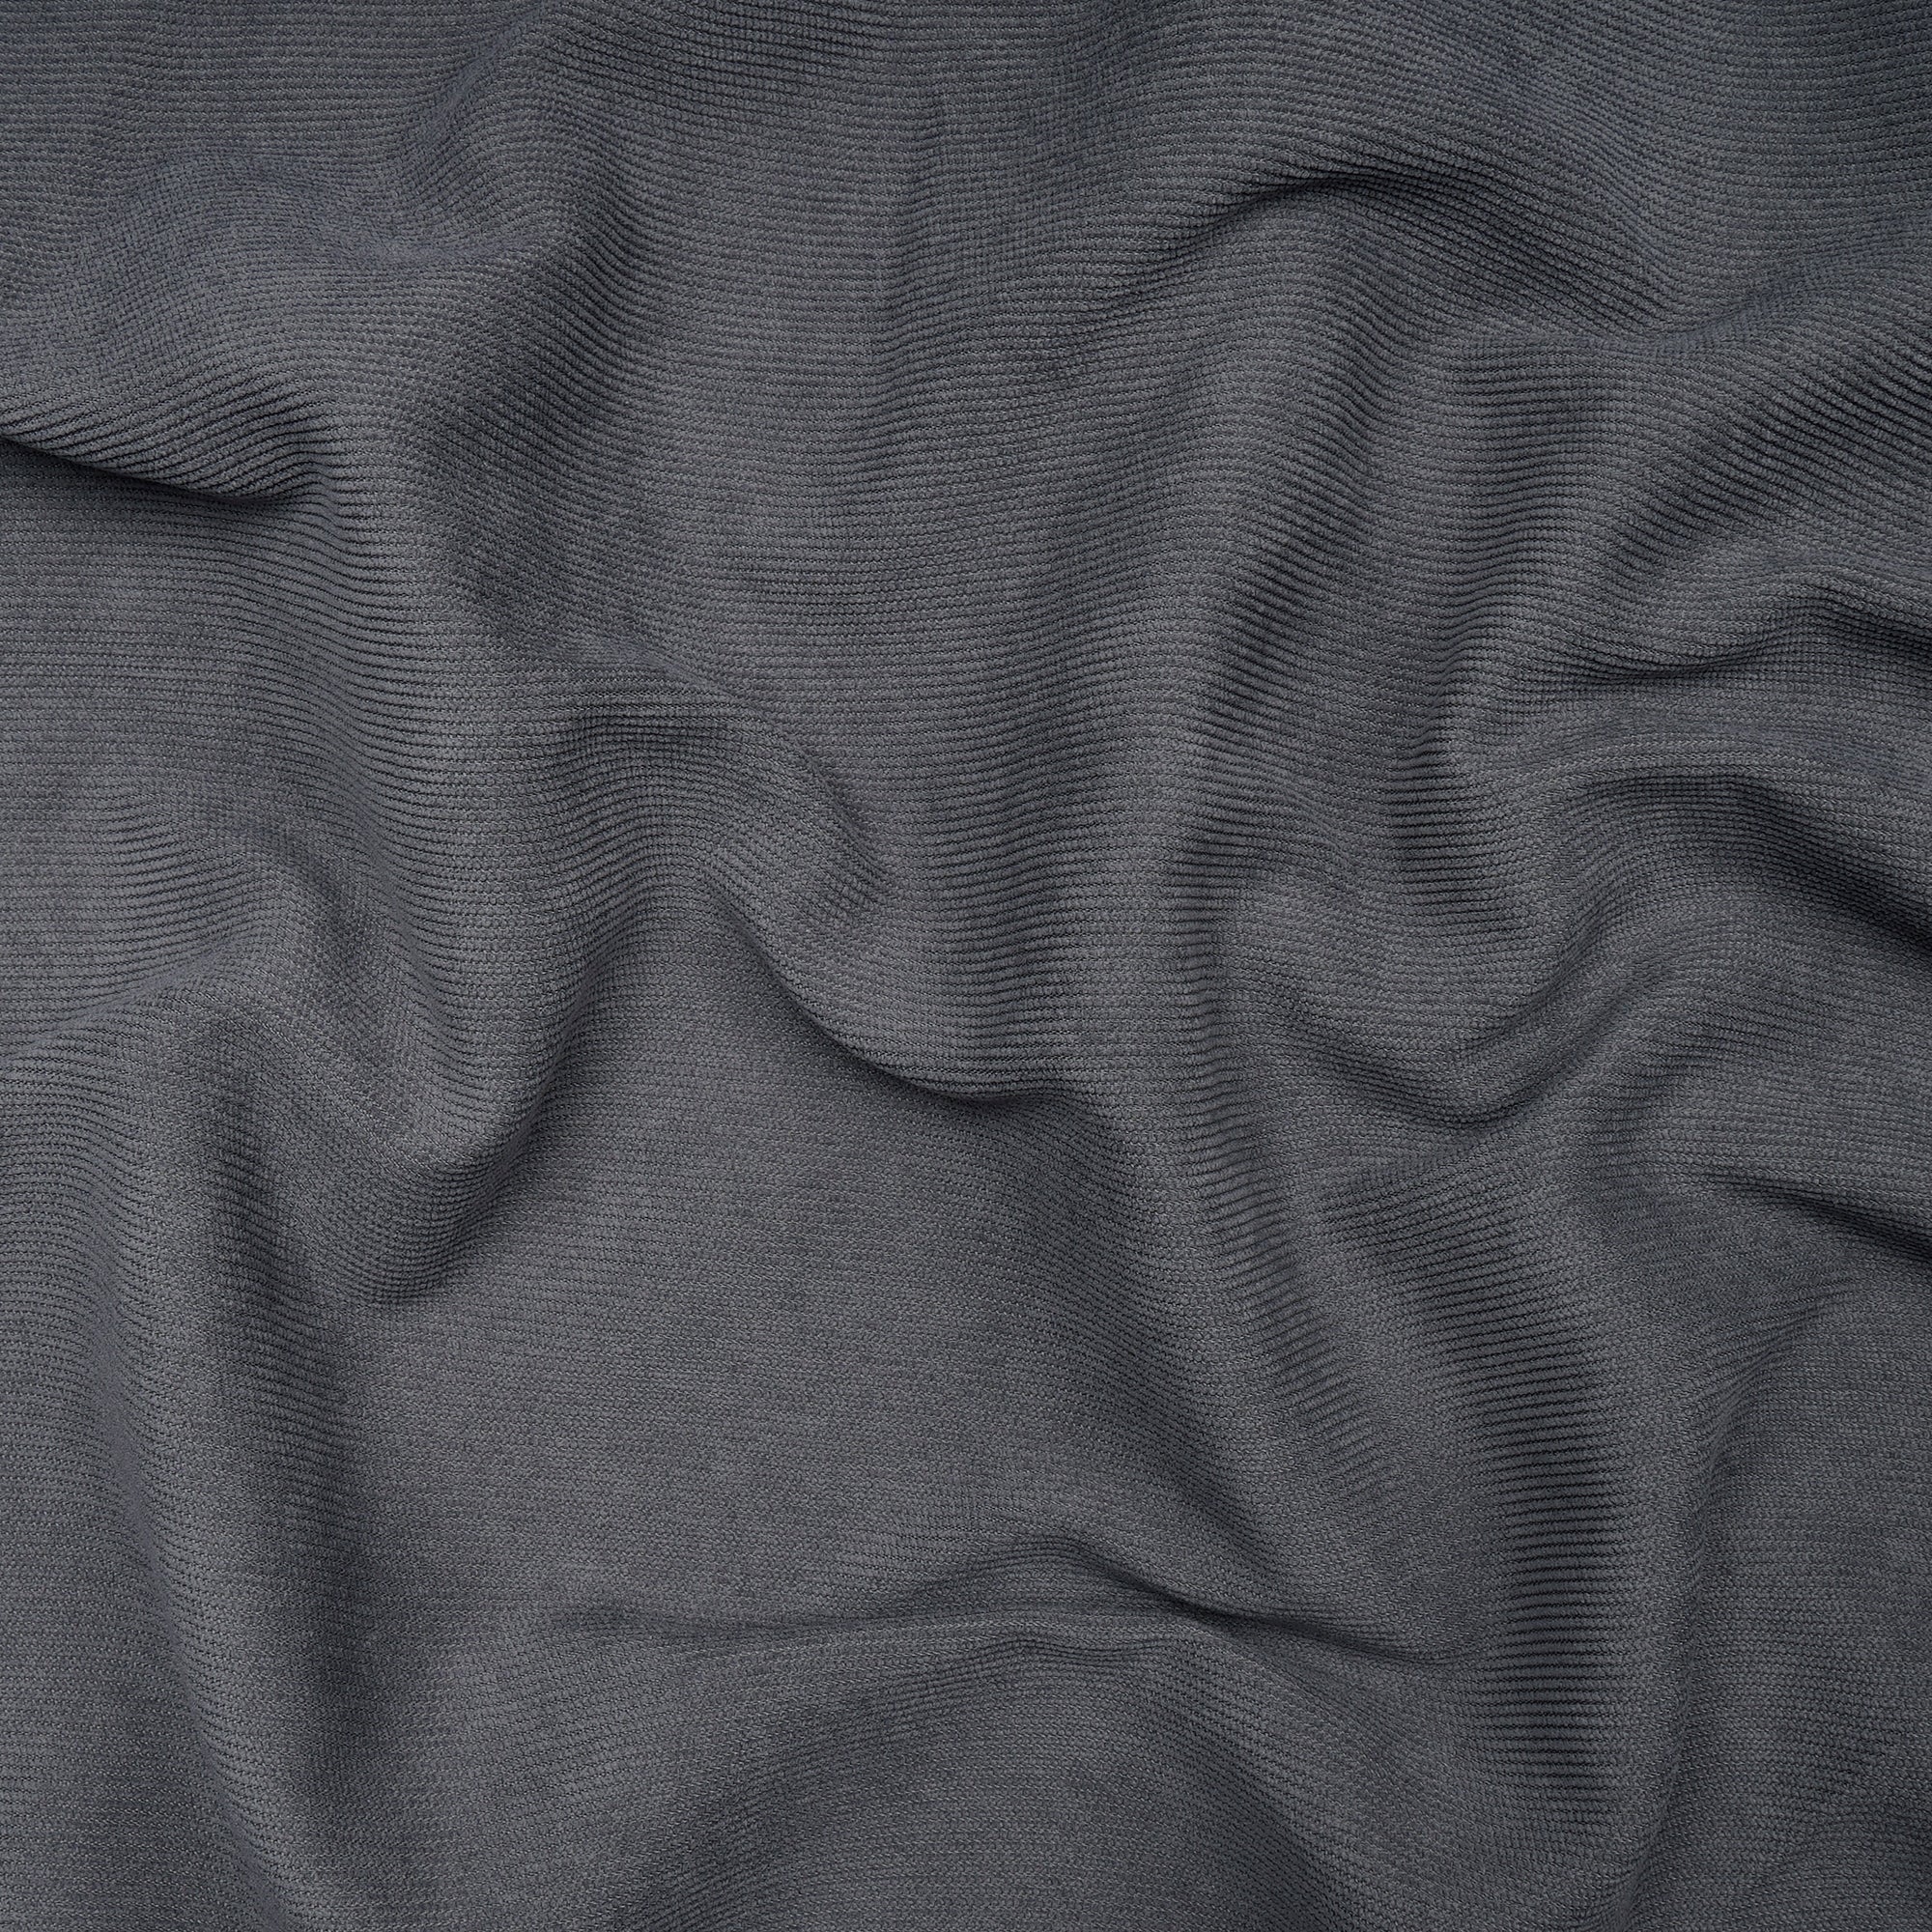 Grey Imported Cotton Corduroy Fabric (60" Wide)